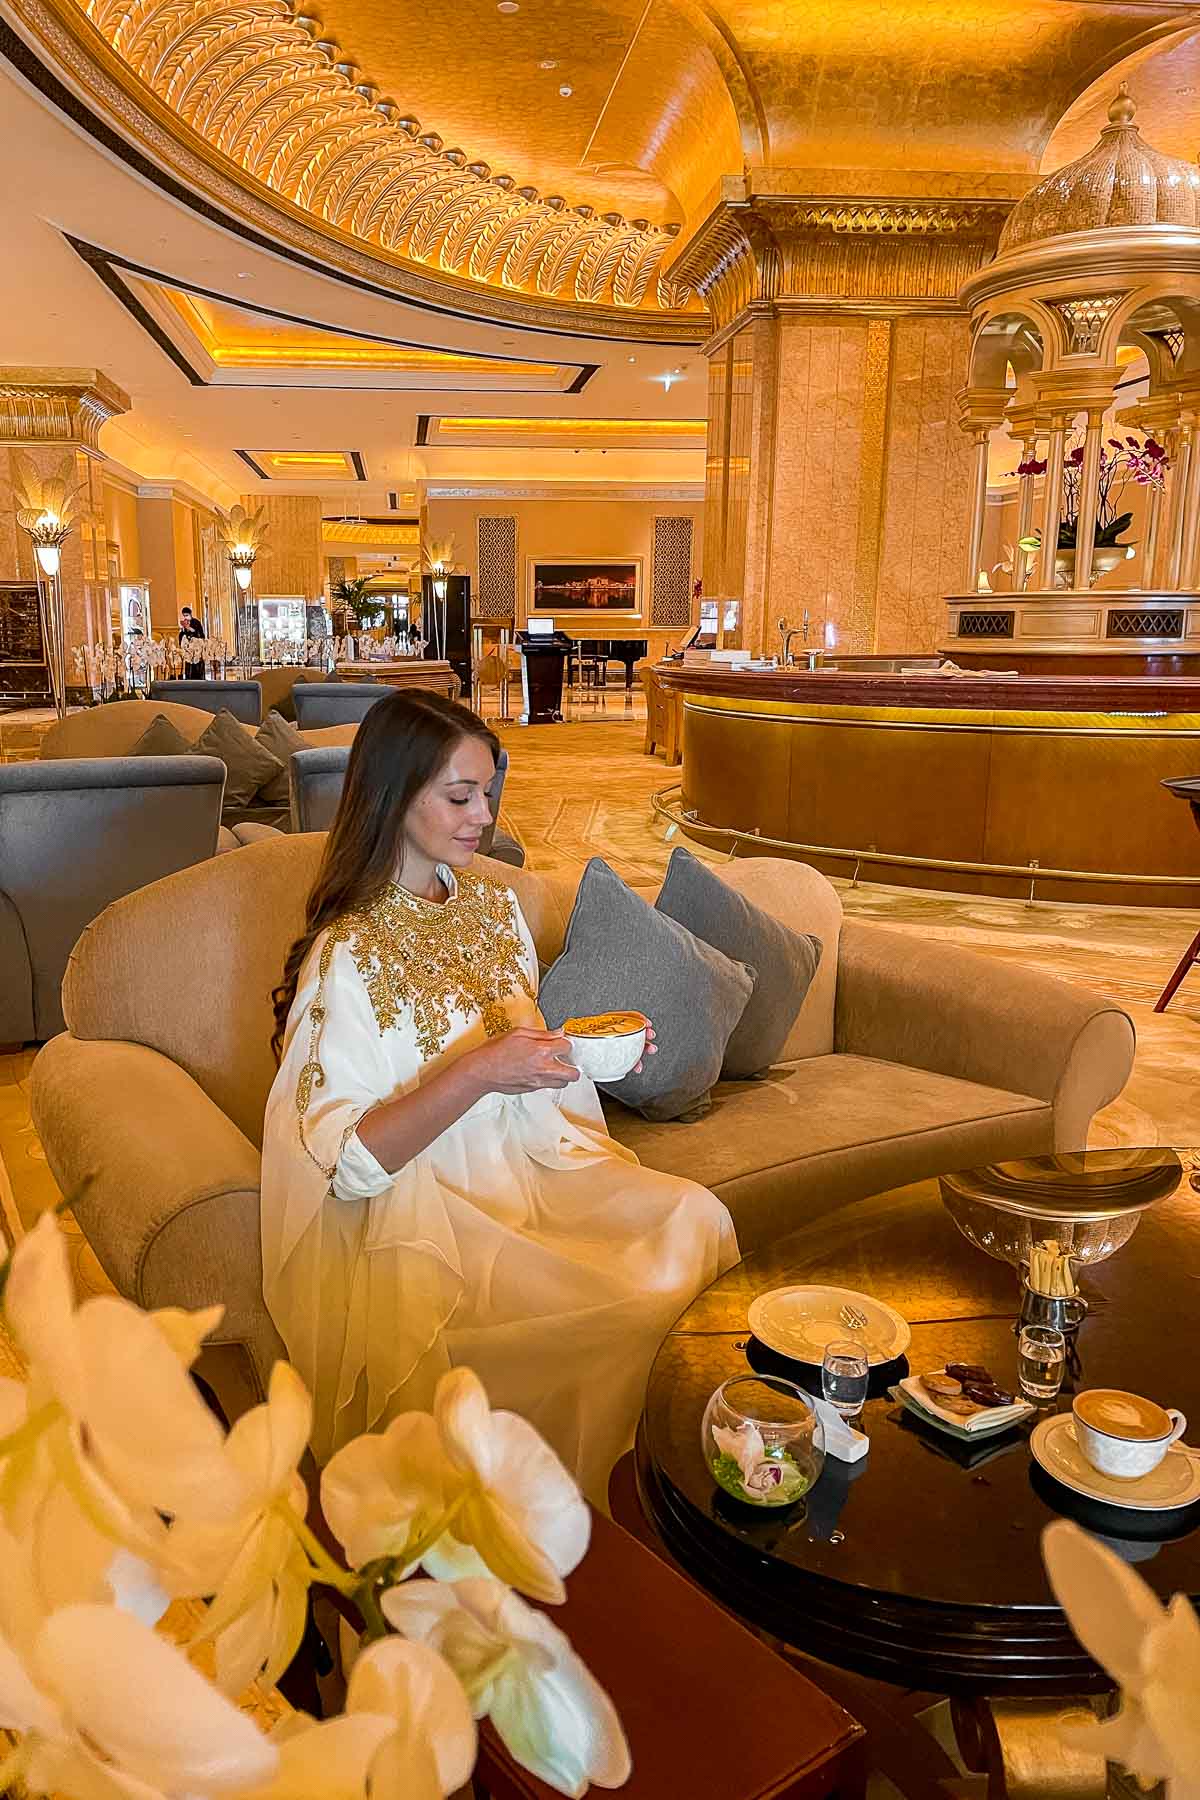 Girl drinking a Gold cappuccino at Emirates Palace, Abu Dhabi